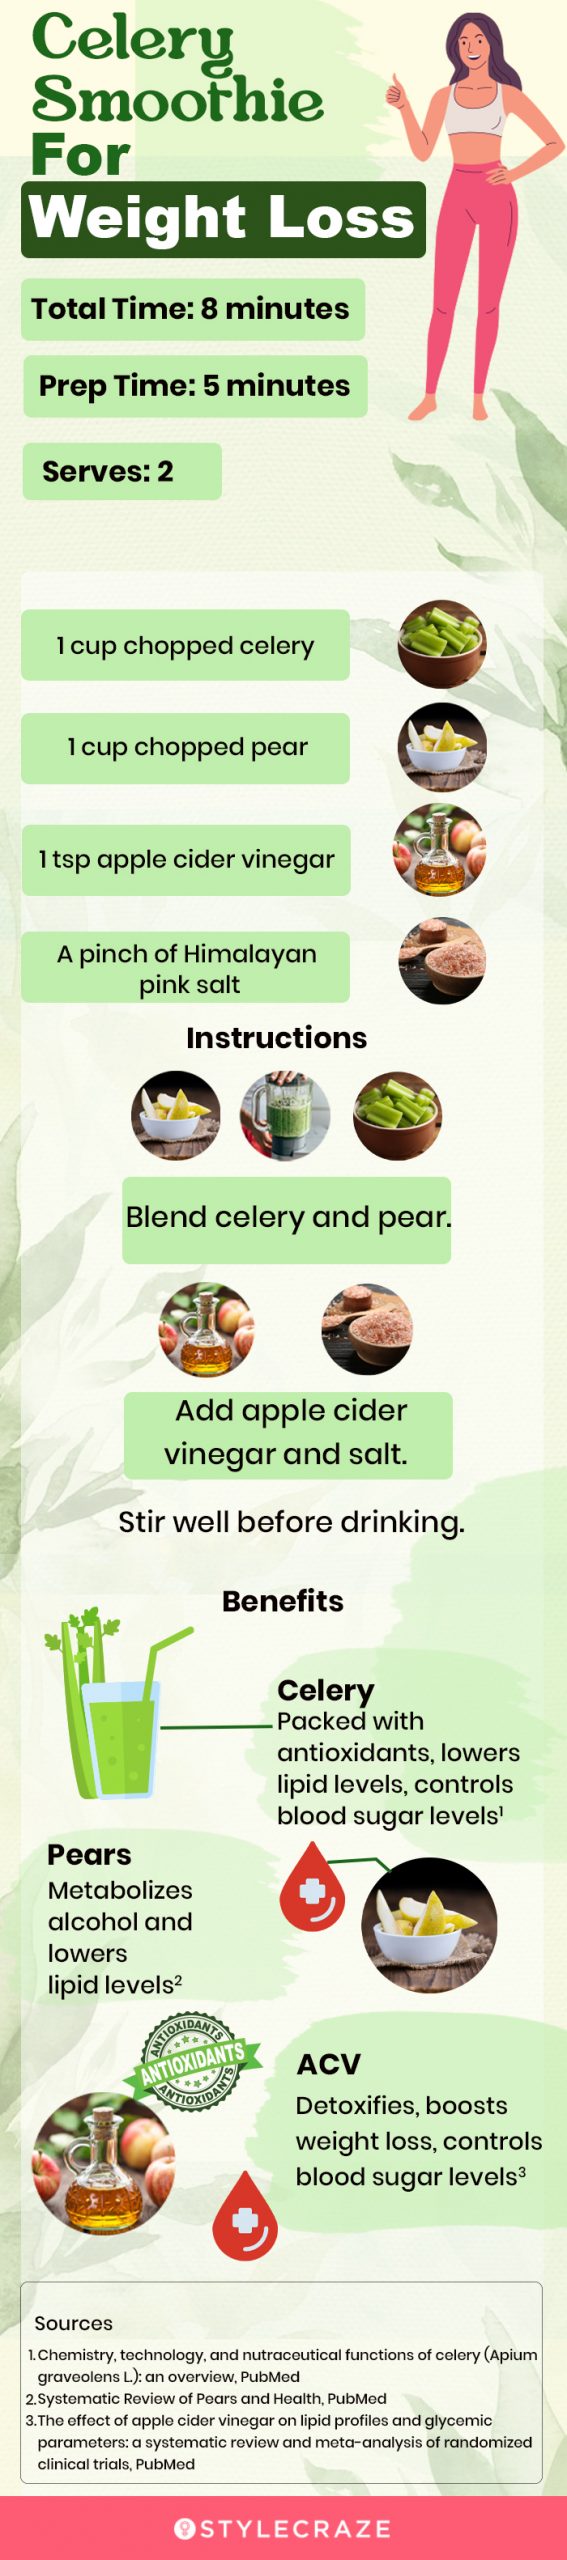 celery smoothie for weight loss (infographic)